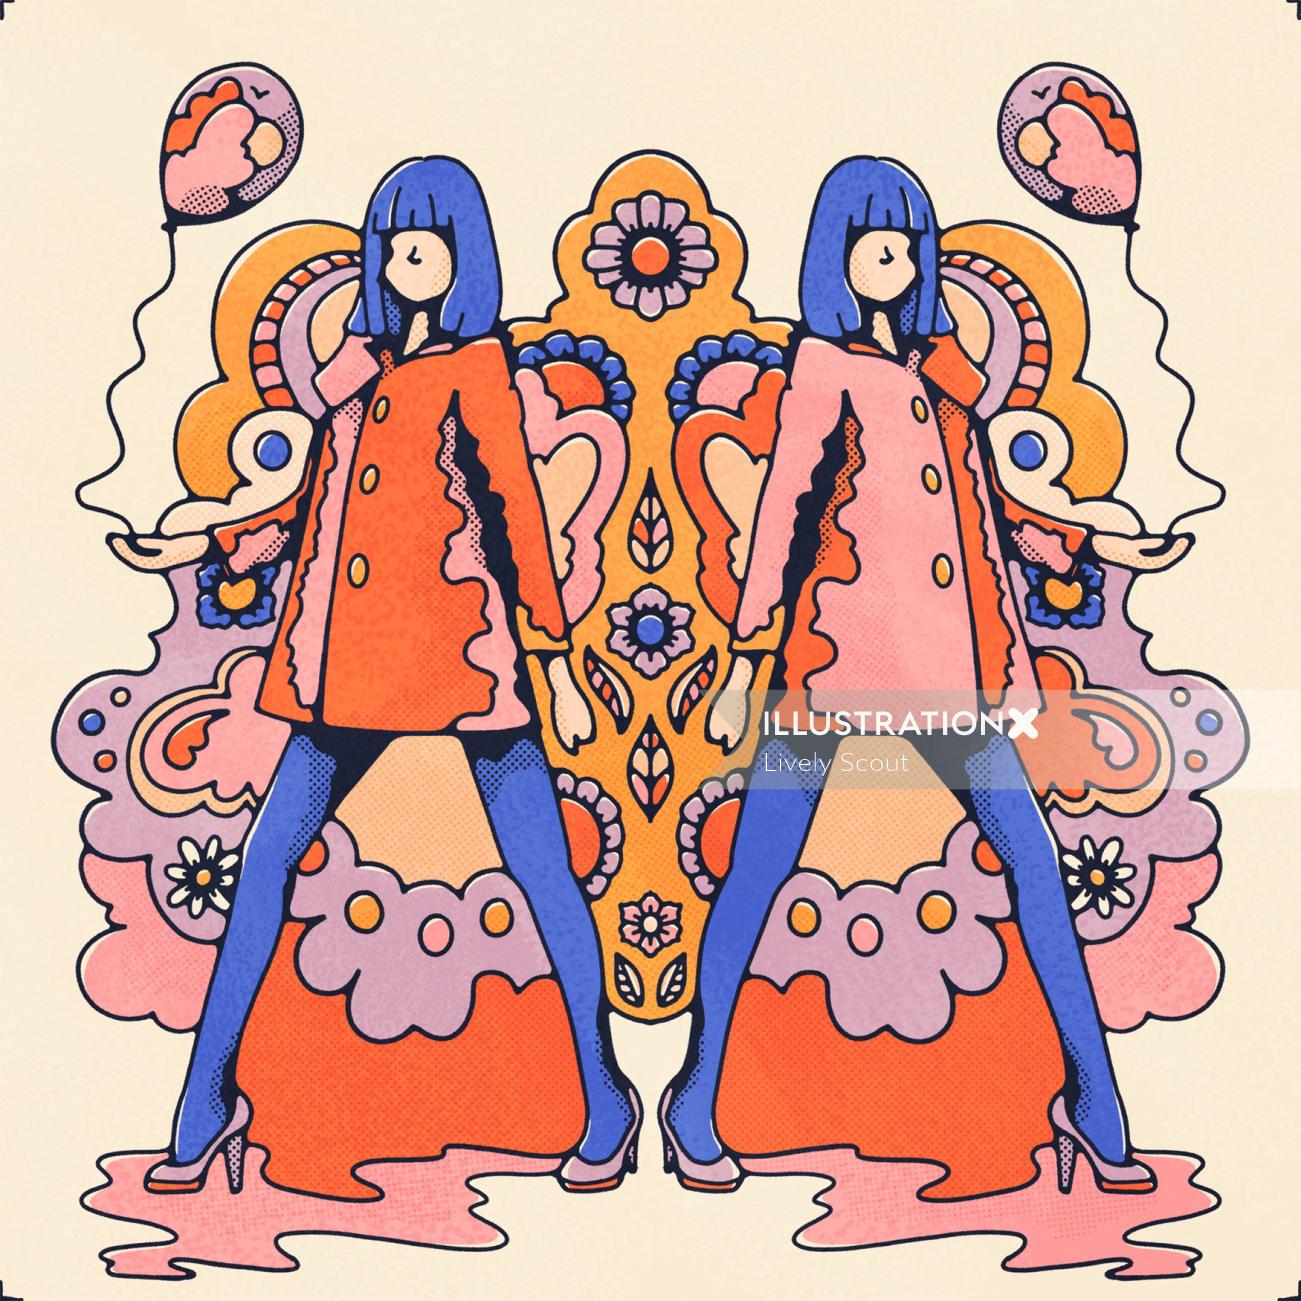 Pair of GoGo dancers holding balloons on psychedelic background